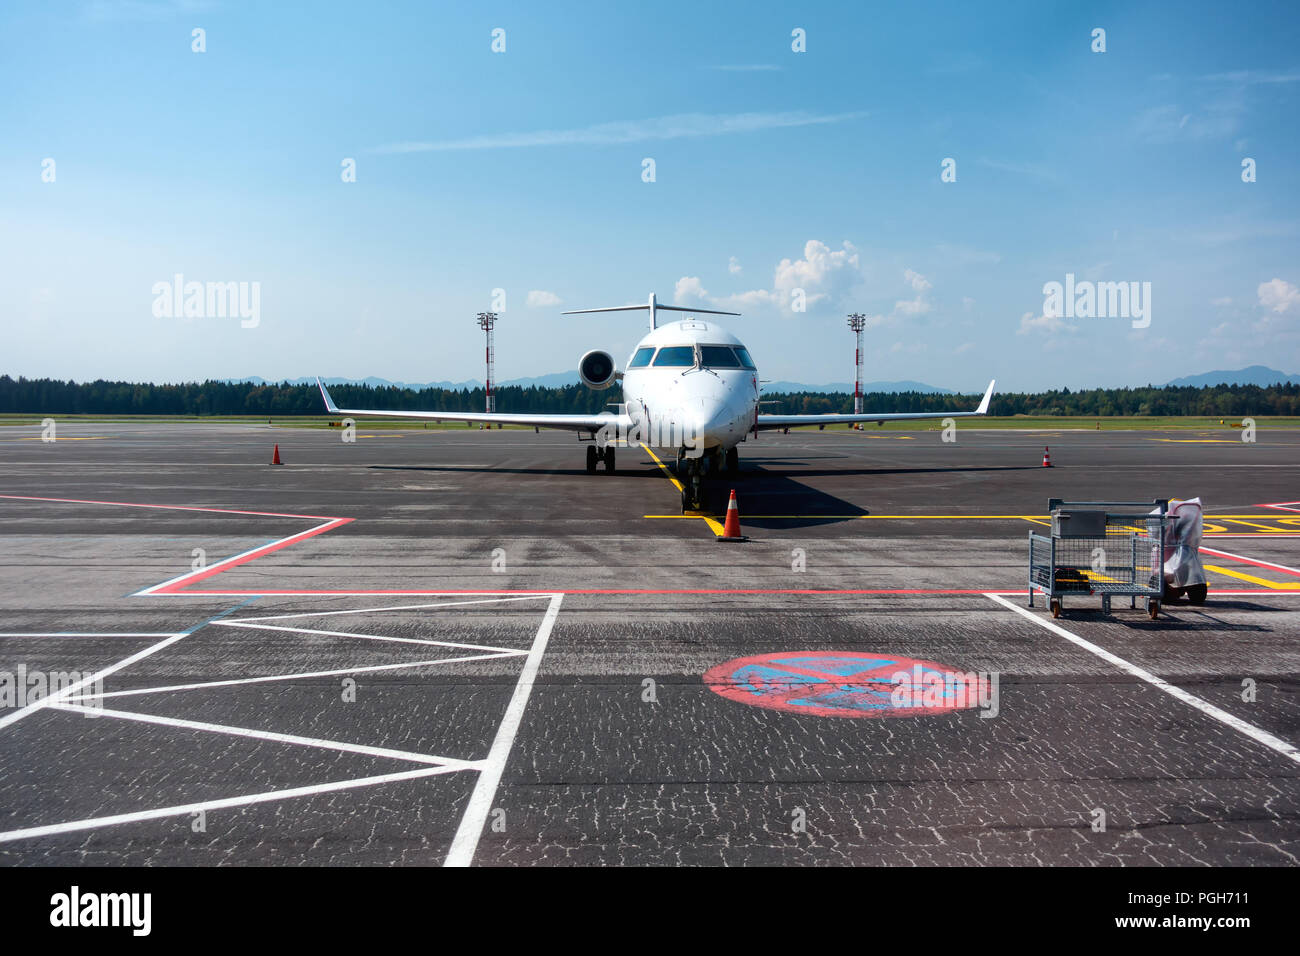 Small business, commuter jet airplane on airport, head on with apron markings on ground, copyspace Stock Photo